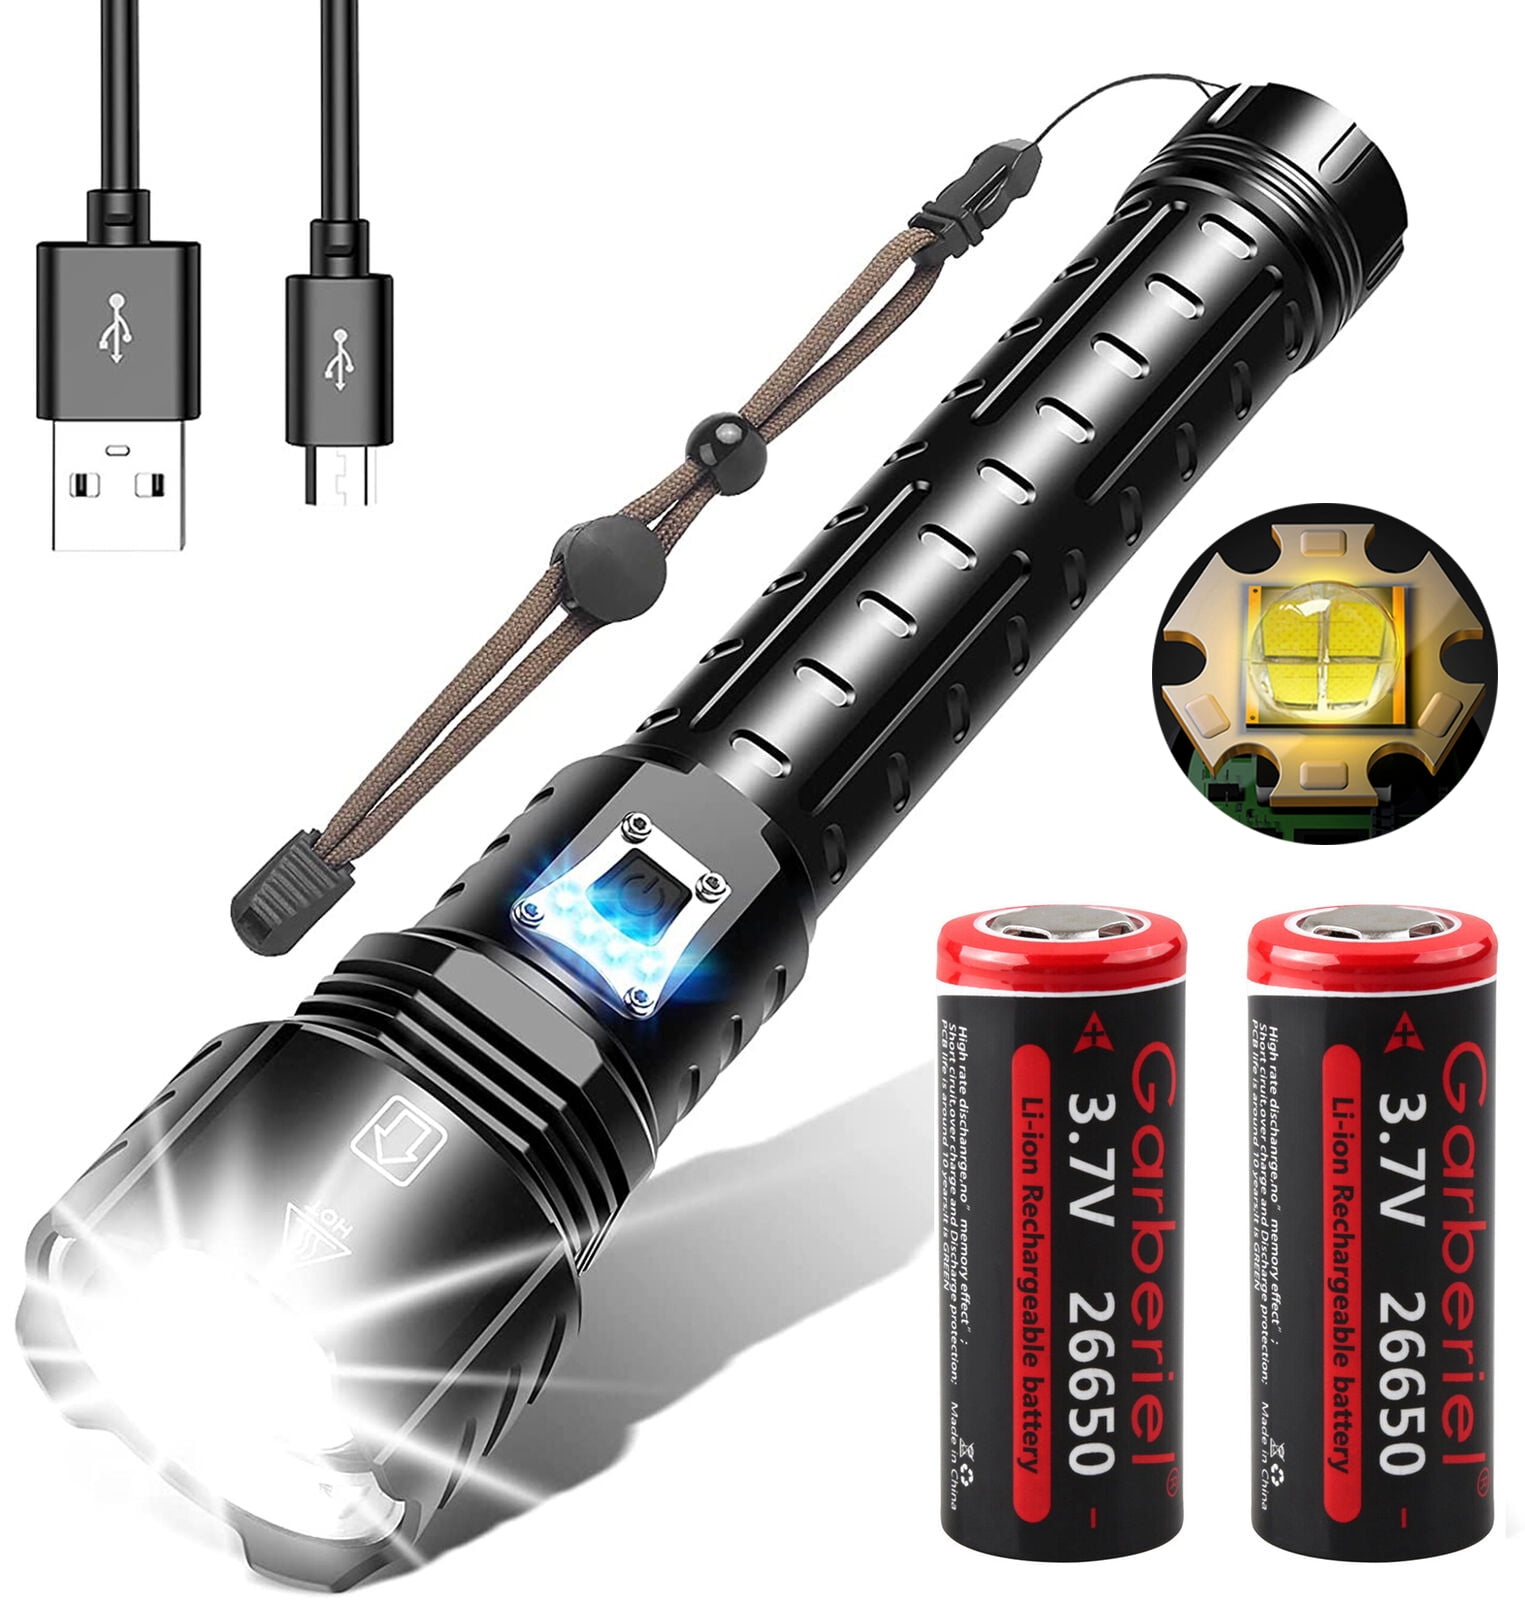 Garberiel XHP90.2 Super Bright 120000Lumens Batteries Waterproof with Camping 26650 Rechargeable 2PCS USB Flashlight Hiking Torch Zoom Tactical for LED